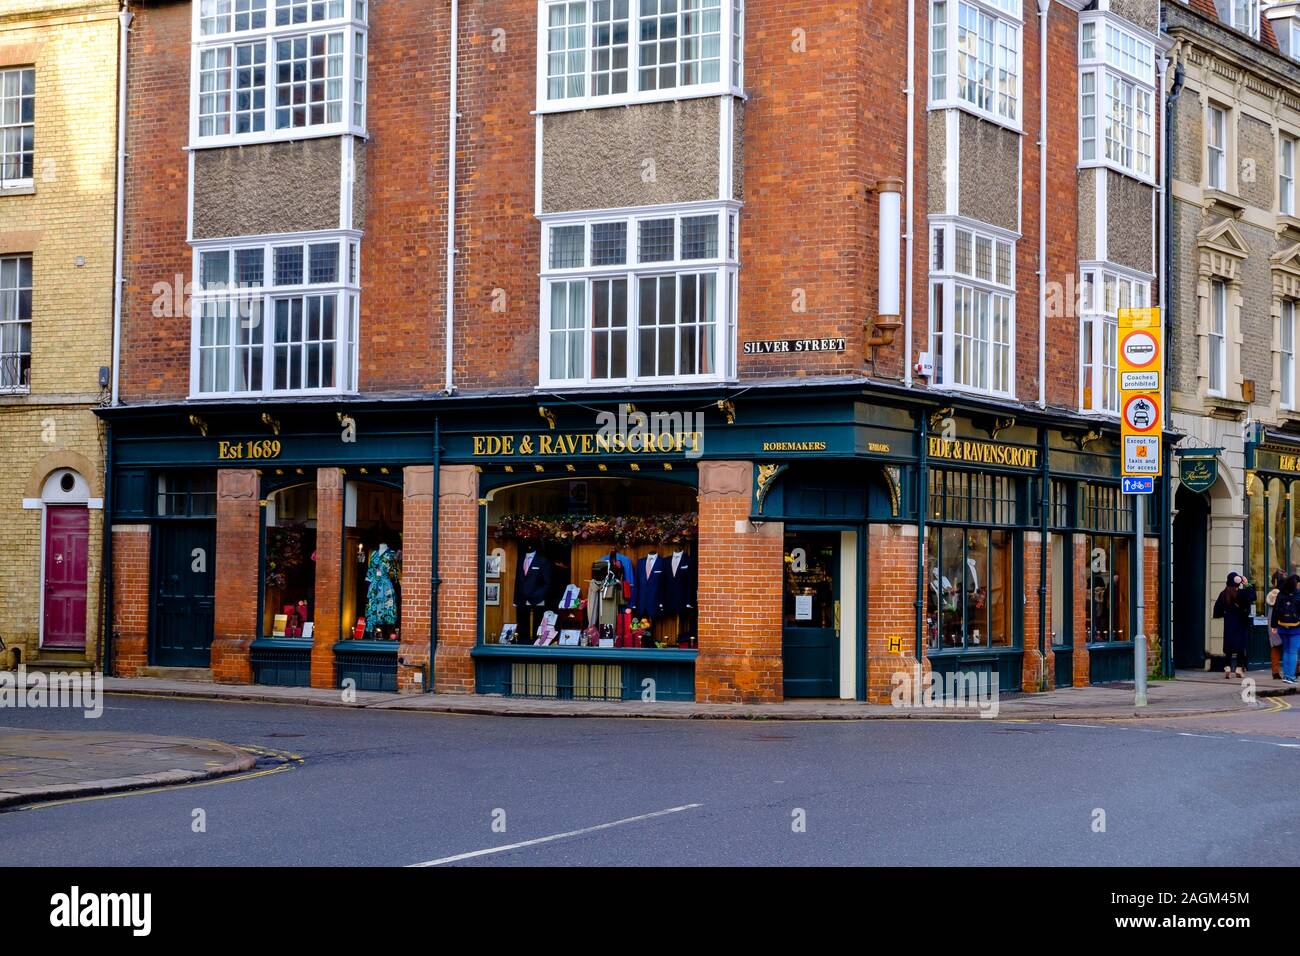 Ede & Ravenscroft are the oldest tailors in London, established in 1689. They make, sell and hire out legal gowns and wigs, clerical dress, civic and Stock Photo